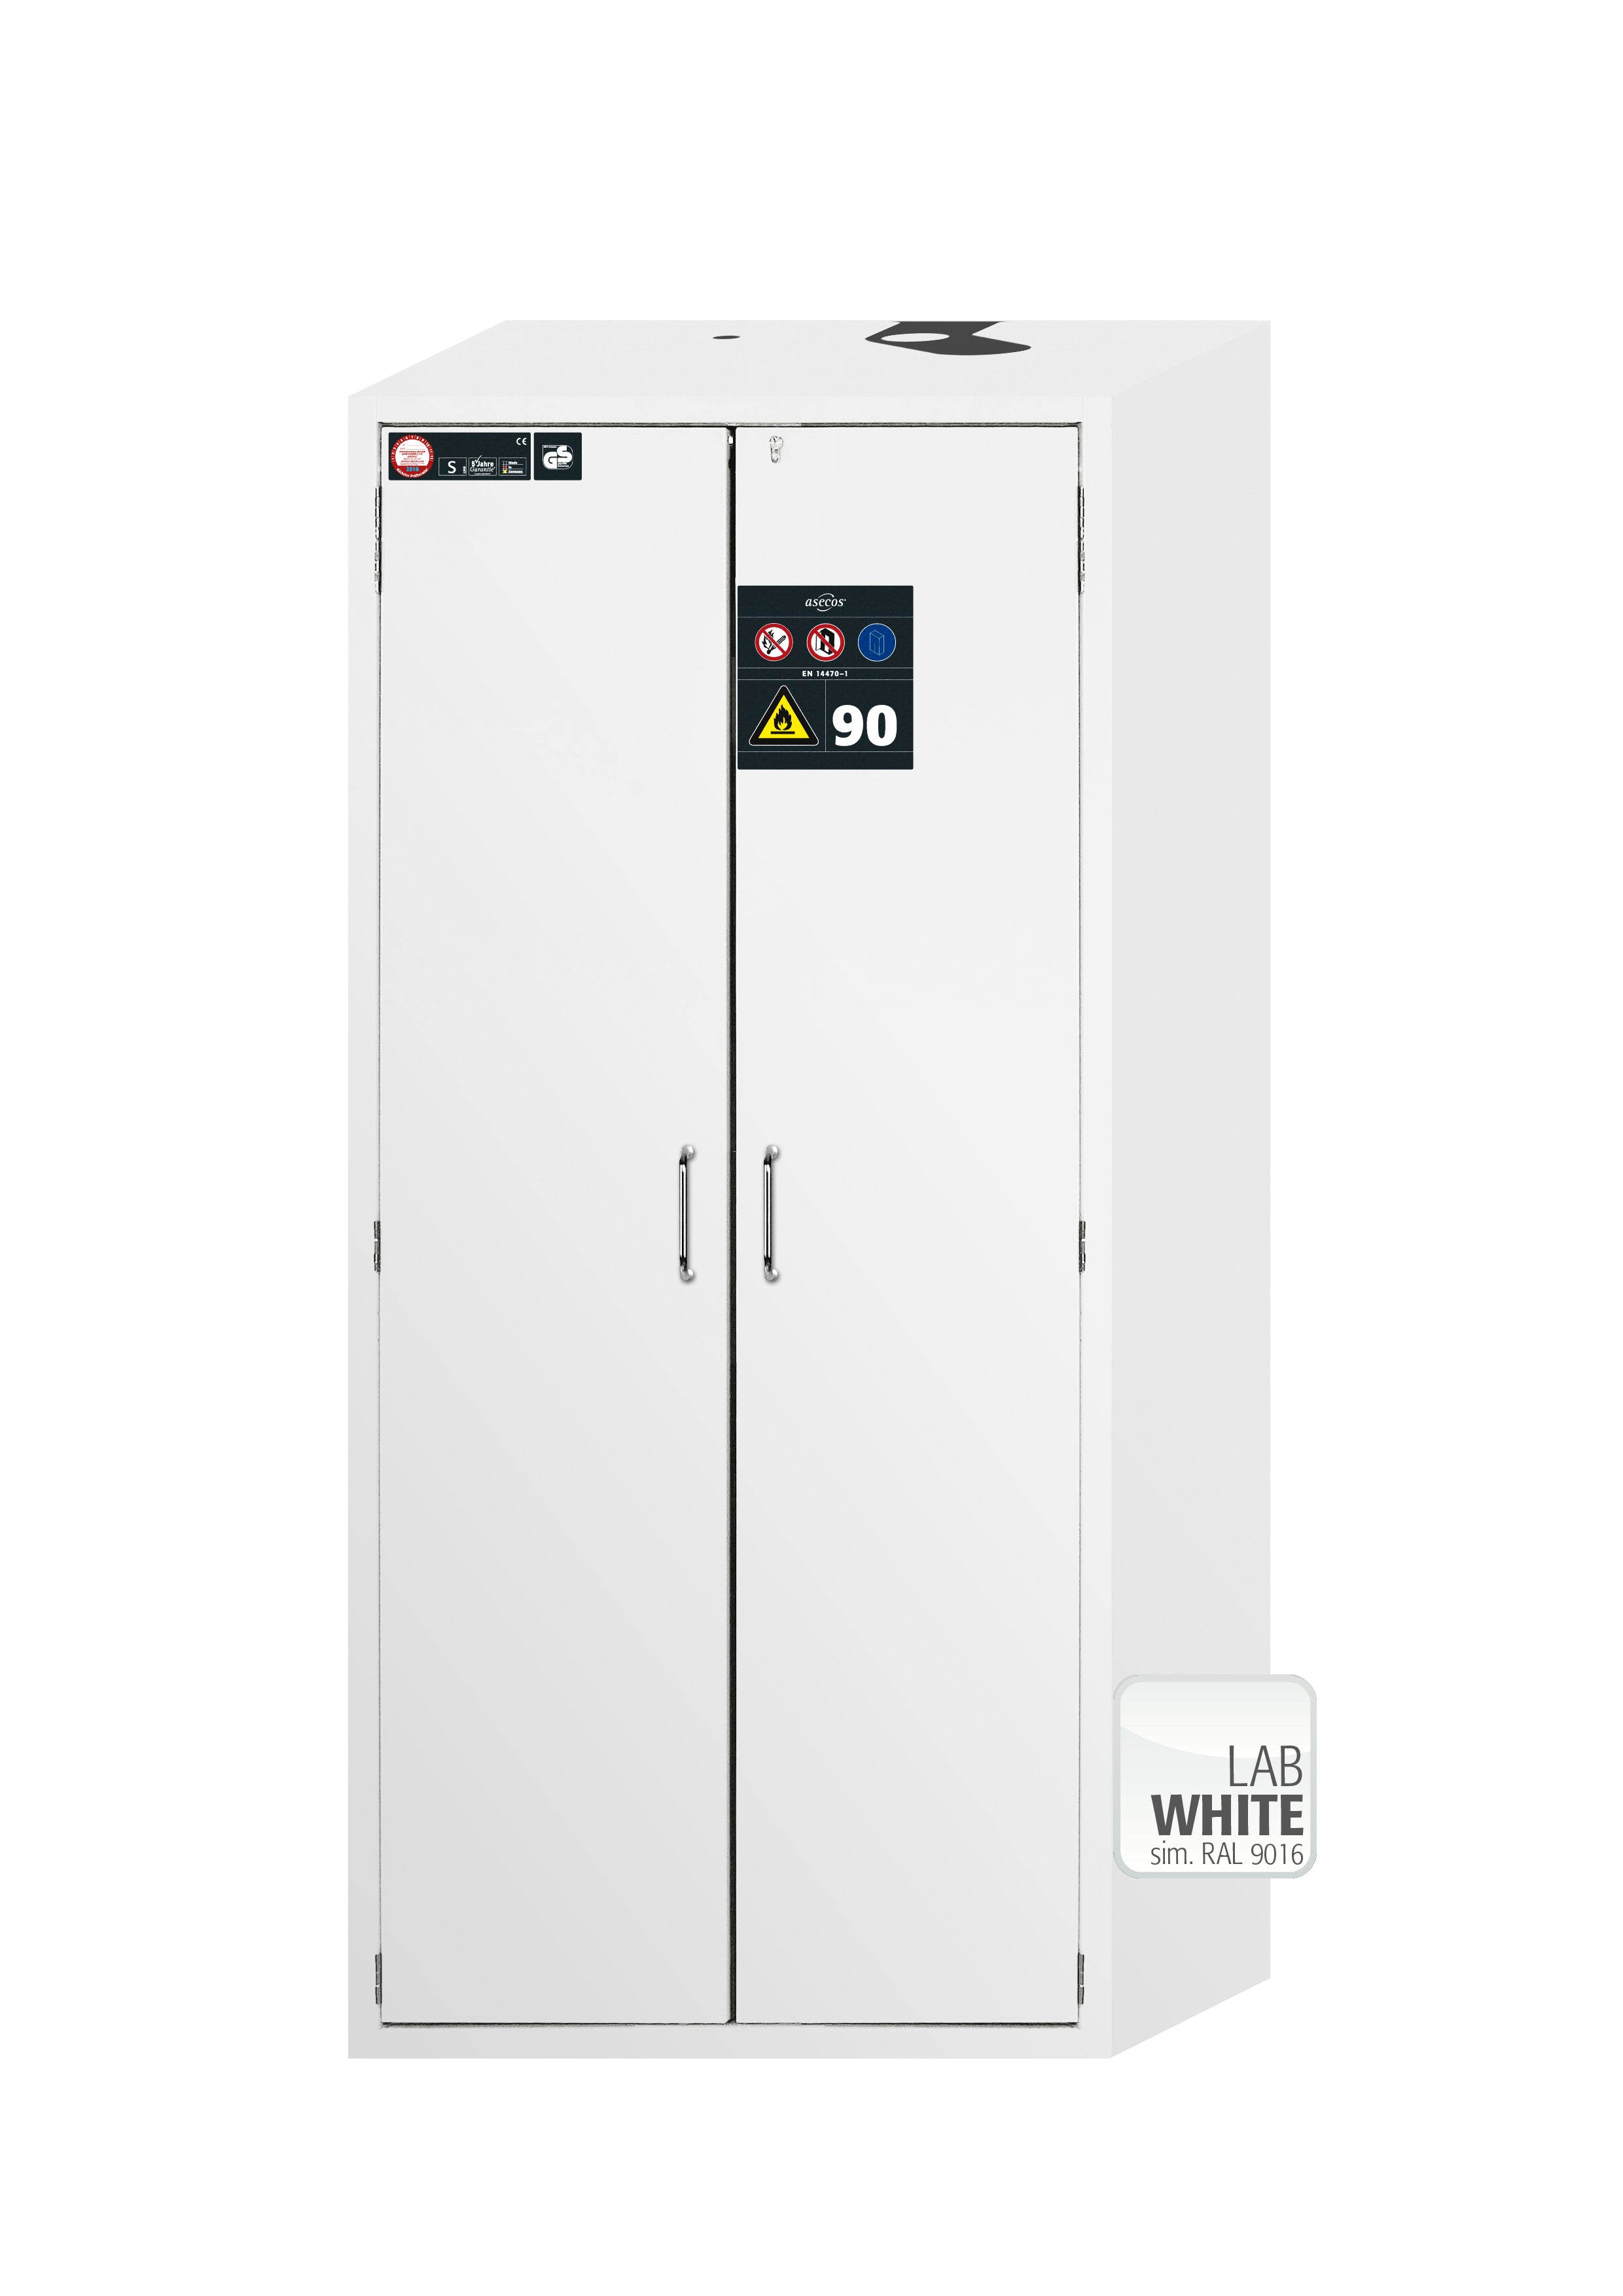 Type 90 safety cabinet S-CLASSIC-90 model S90.196.090.WDAS in laboratory white (similar to RAL 9016) with 5x standard pull-out tray (stainless steel 1.4301)